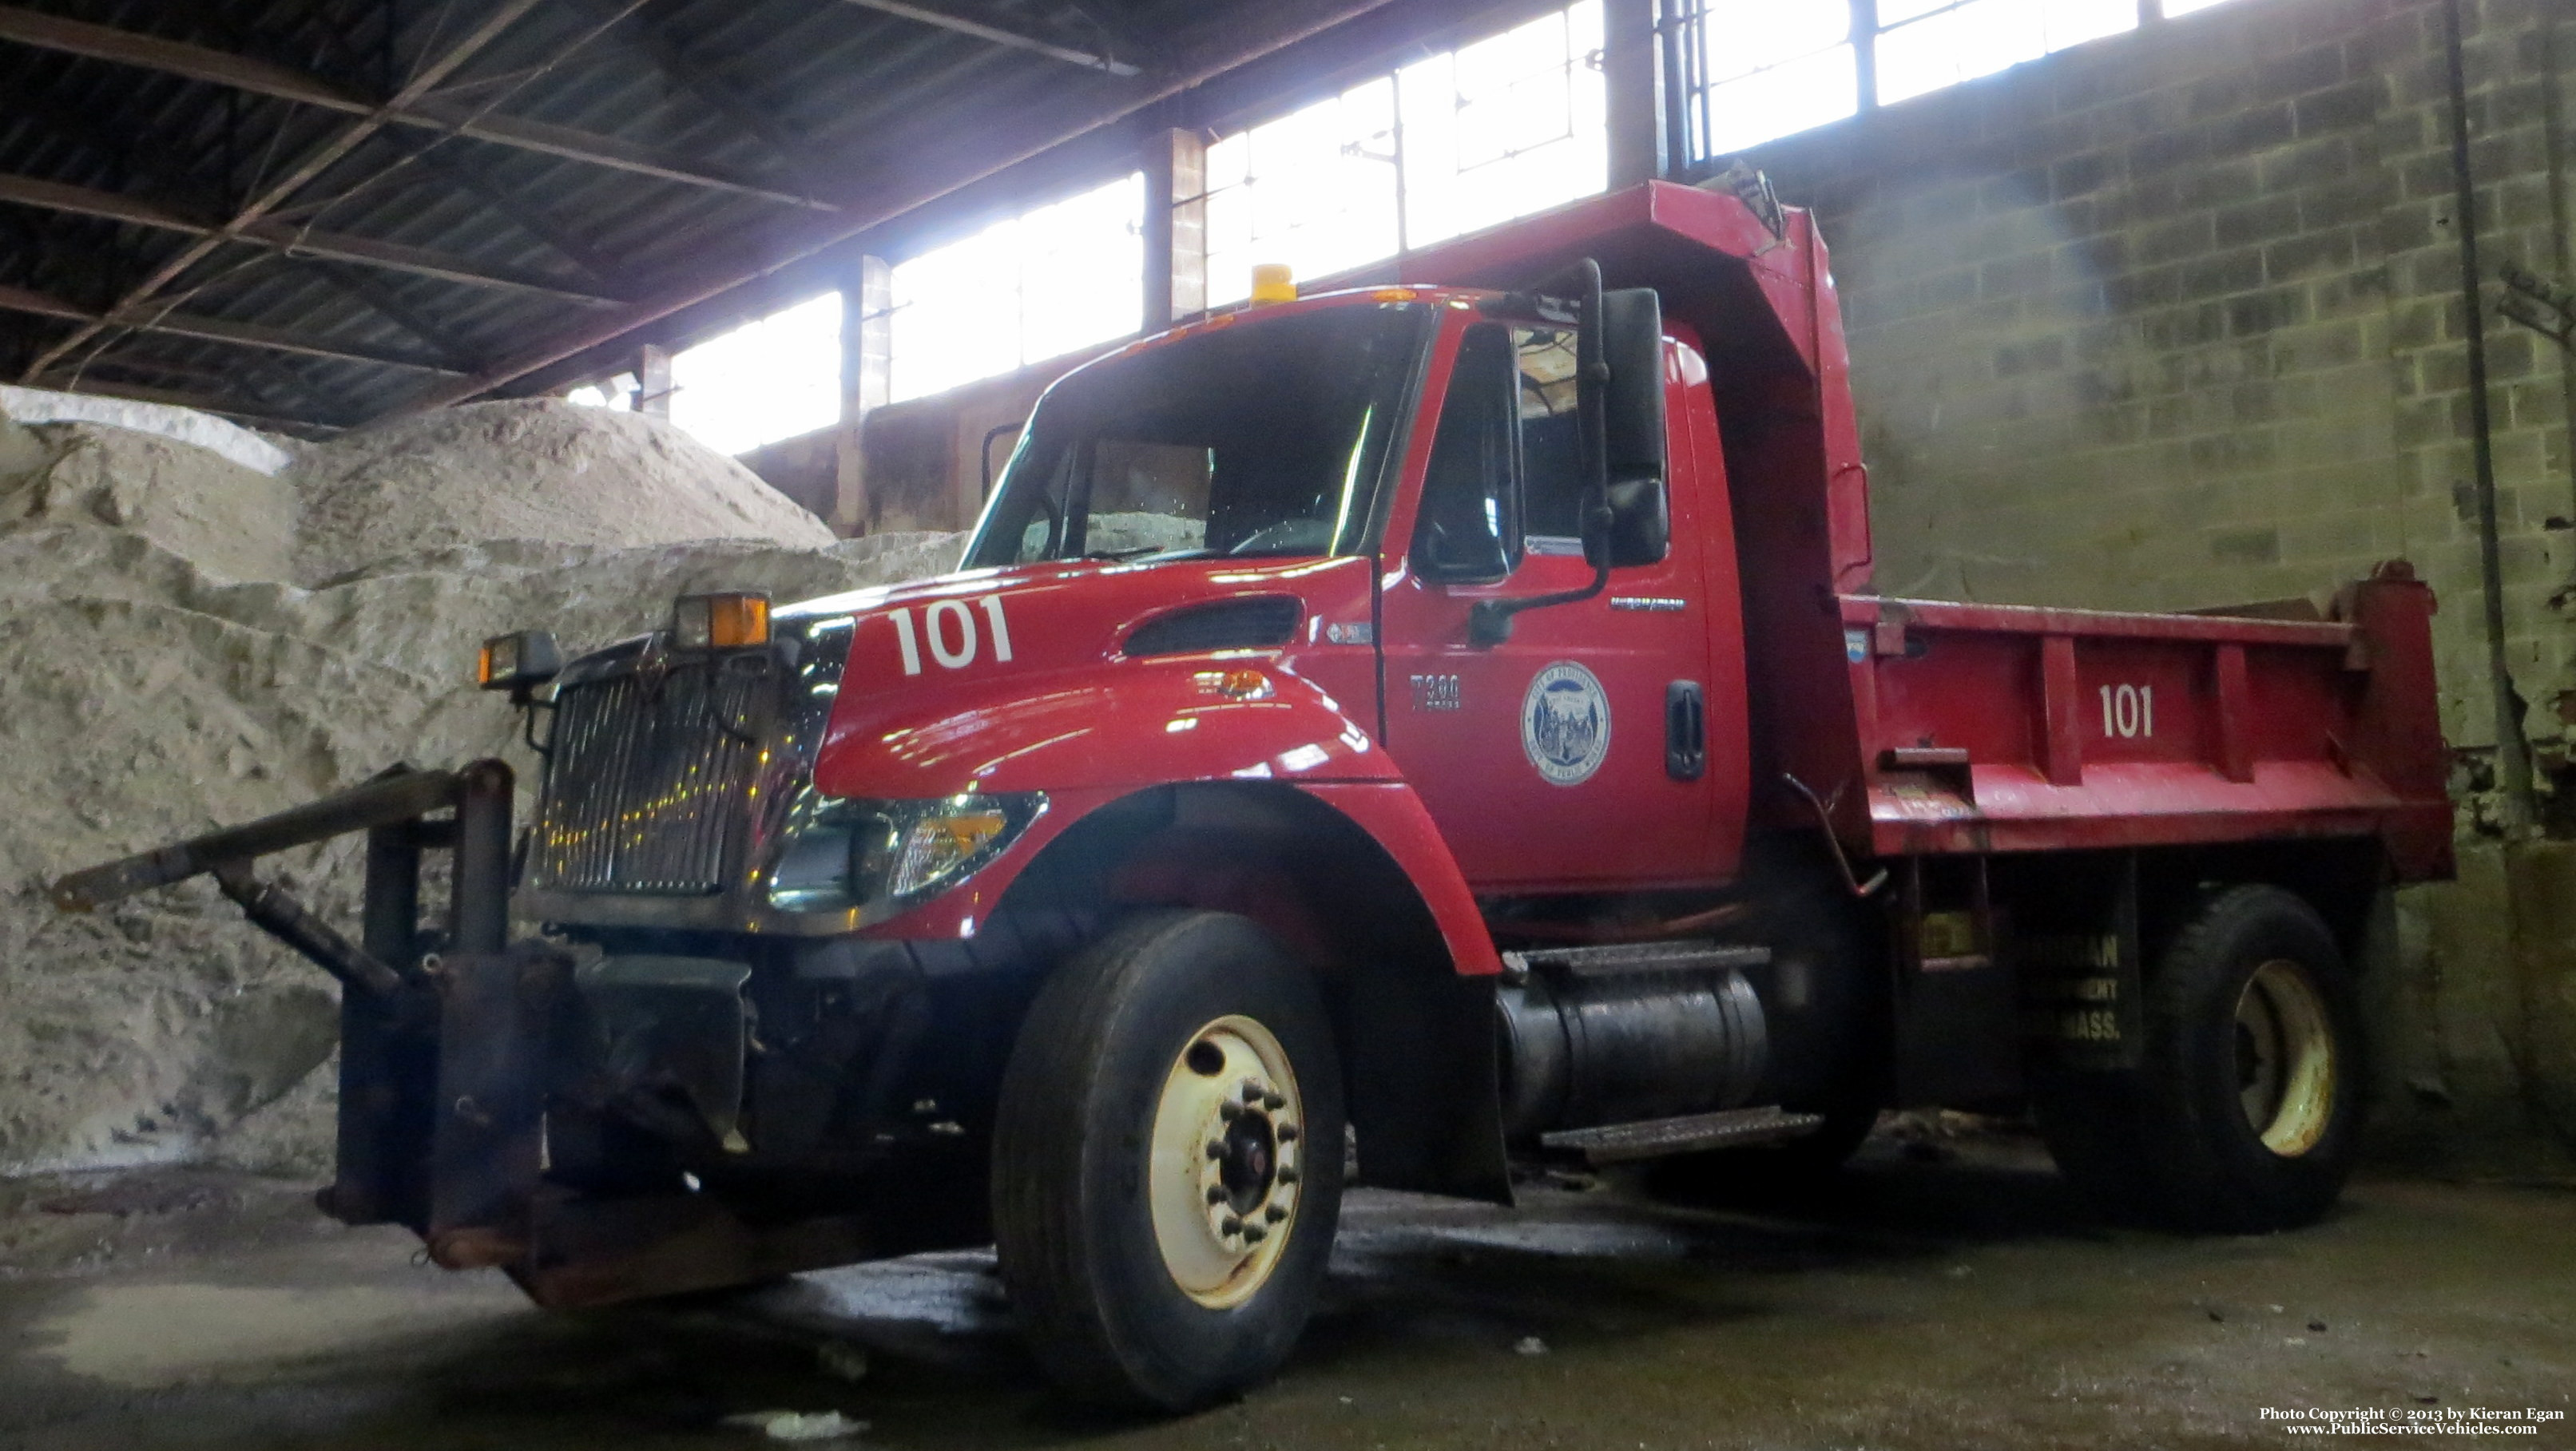 A photo  of Providence Highway Division
            Truck 101, a 2002-2012 International 7300             taken by Kieran Egan